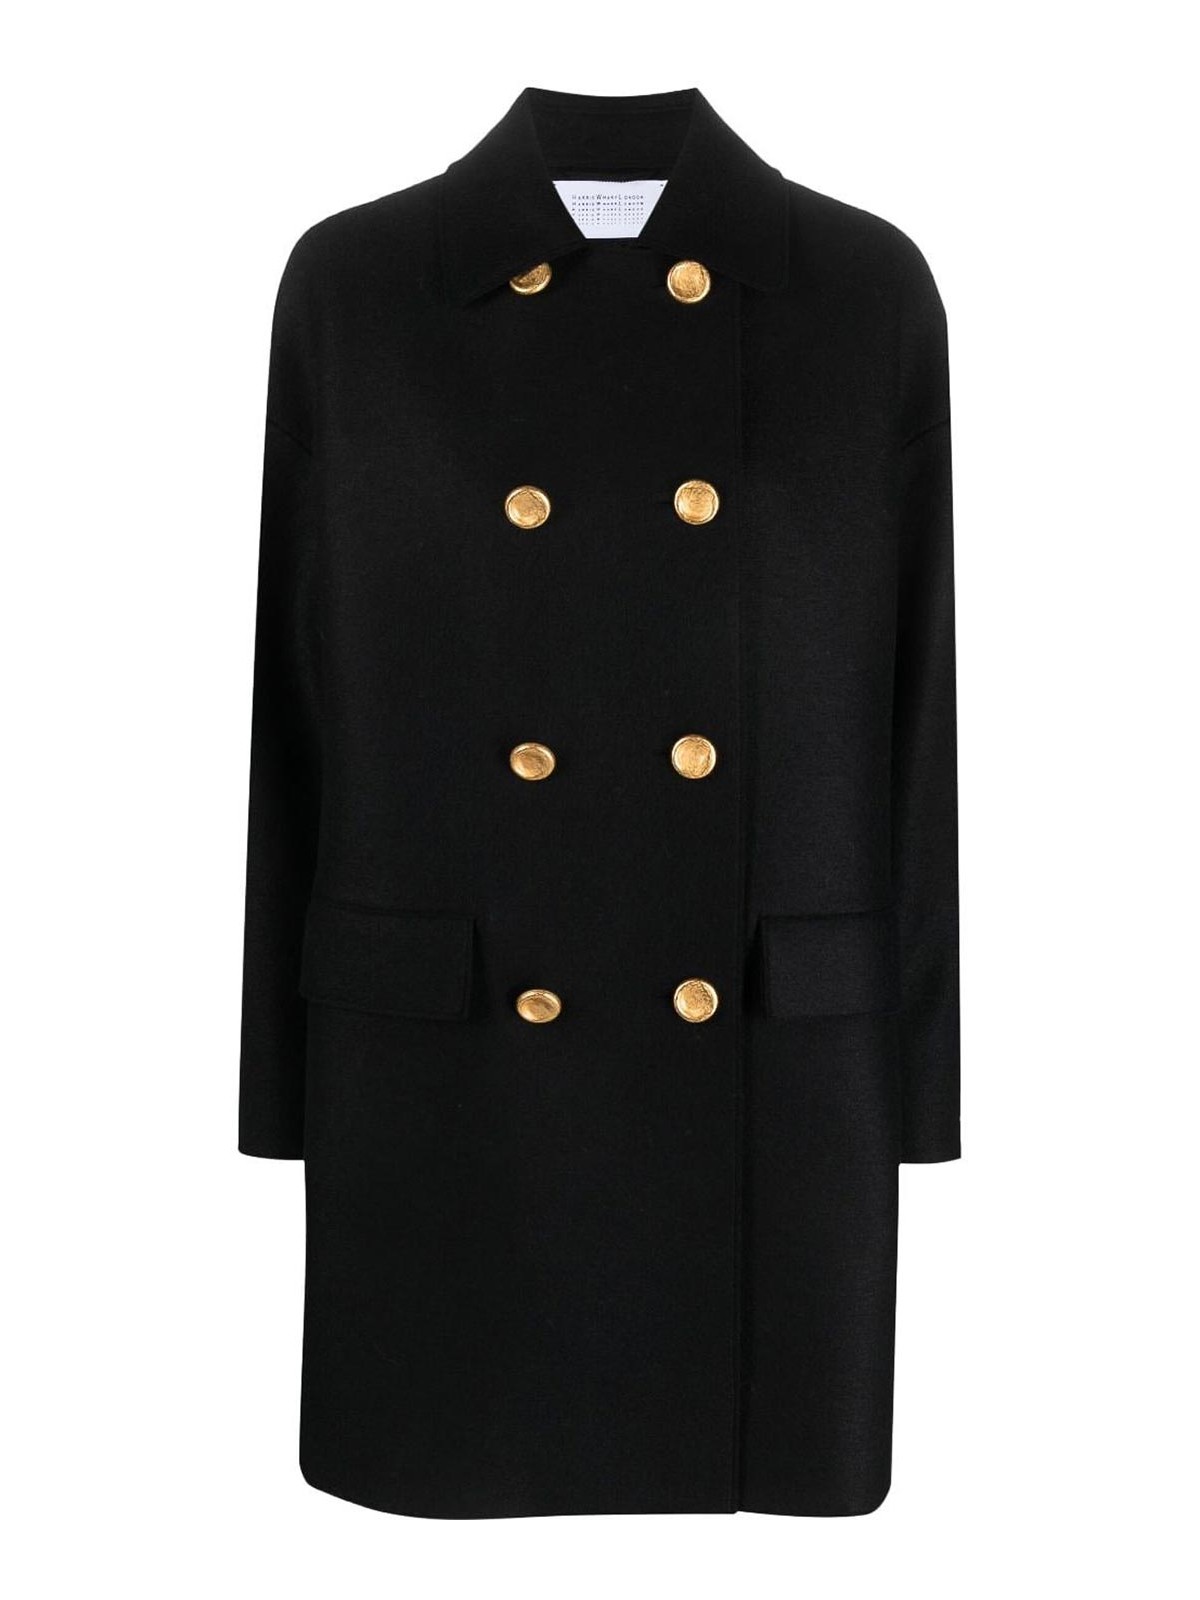 HARRIS WHARF LONDON DOUBLE-BREASTED COAT BLACK KNITTED